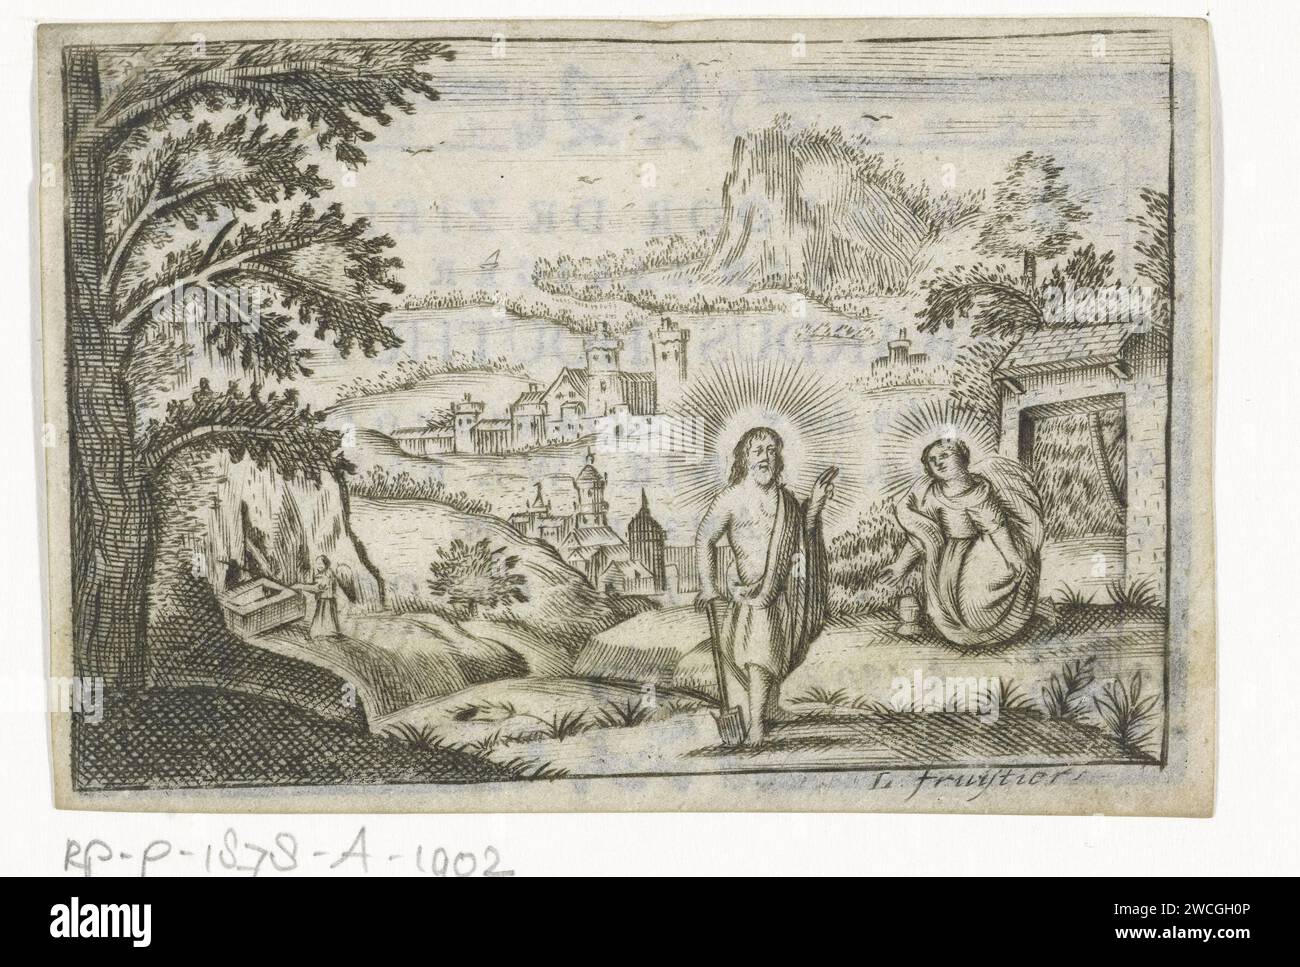 Christ appears to Maria Magdalena, Lodewijk Joseph Fruytiers, 1723 - 1782 print Landscape with Christ and Mary Magdalena. Christ makes a blessing gesture to Magdalena who is in a kneeling attitude for him. An angel in the background. Verso A prayer card for Everardus Houthuyzen from Amsterdam, died in 1790.  parchment (animal material) engraving Mary Magdalene kneeling before Christ, who is usually represented as a gardener with a hoe and/or a spade; 'Noli me tangere' Stock Photo